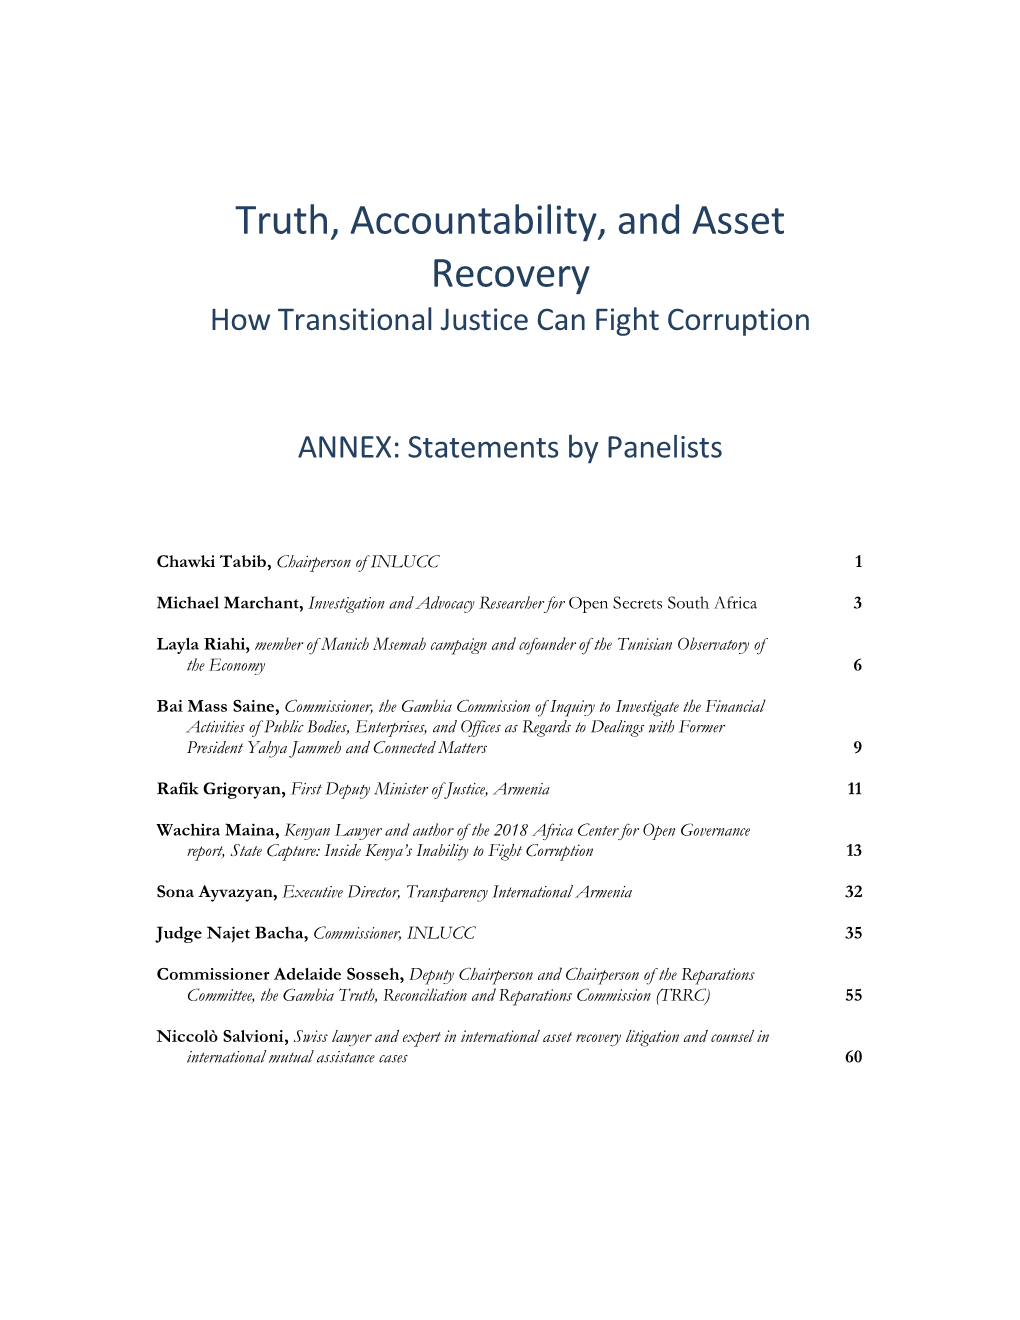 Truth, Accountability, and Asset Recovery How Transitional Justice Can Fight Corruption